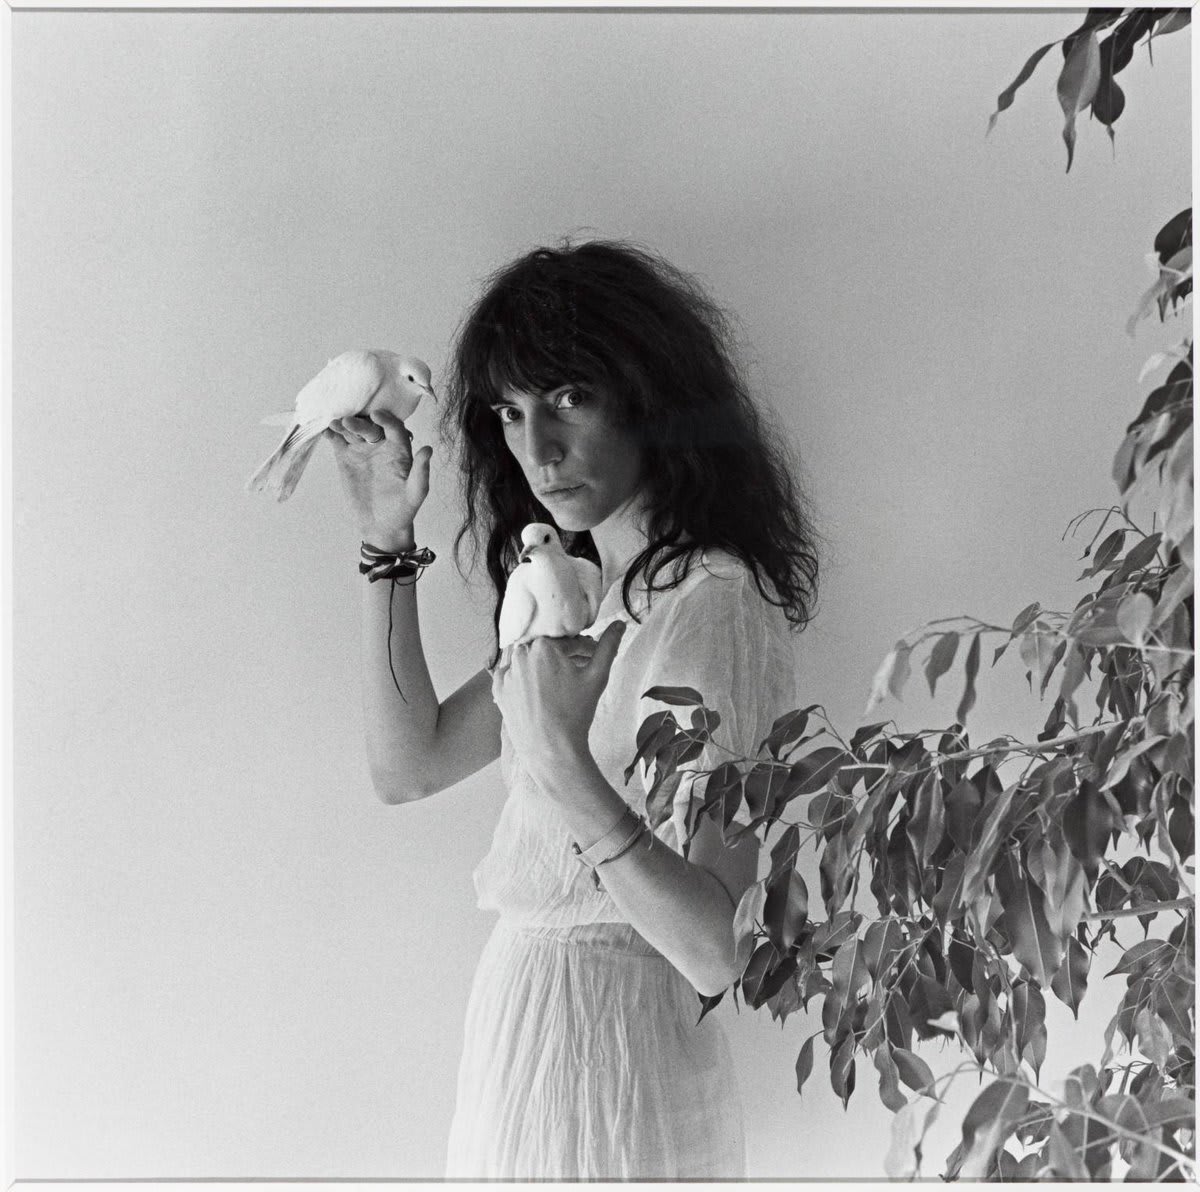 'I was his first model, which fills me with pride. The photographs he took contain a depth of mutual love and trust inseparable from the image.' - Patti Smith Robert Mapplethorpe took powerful portraits of iconic figures. Dive into his life & work here ➡️